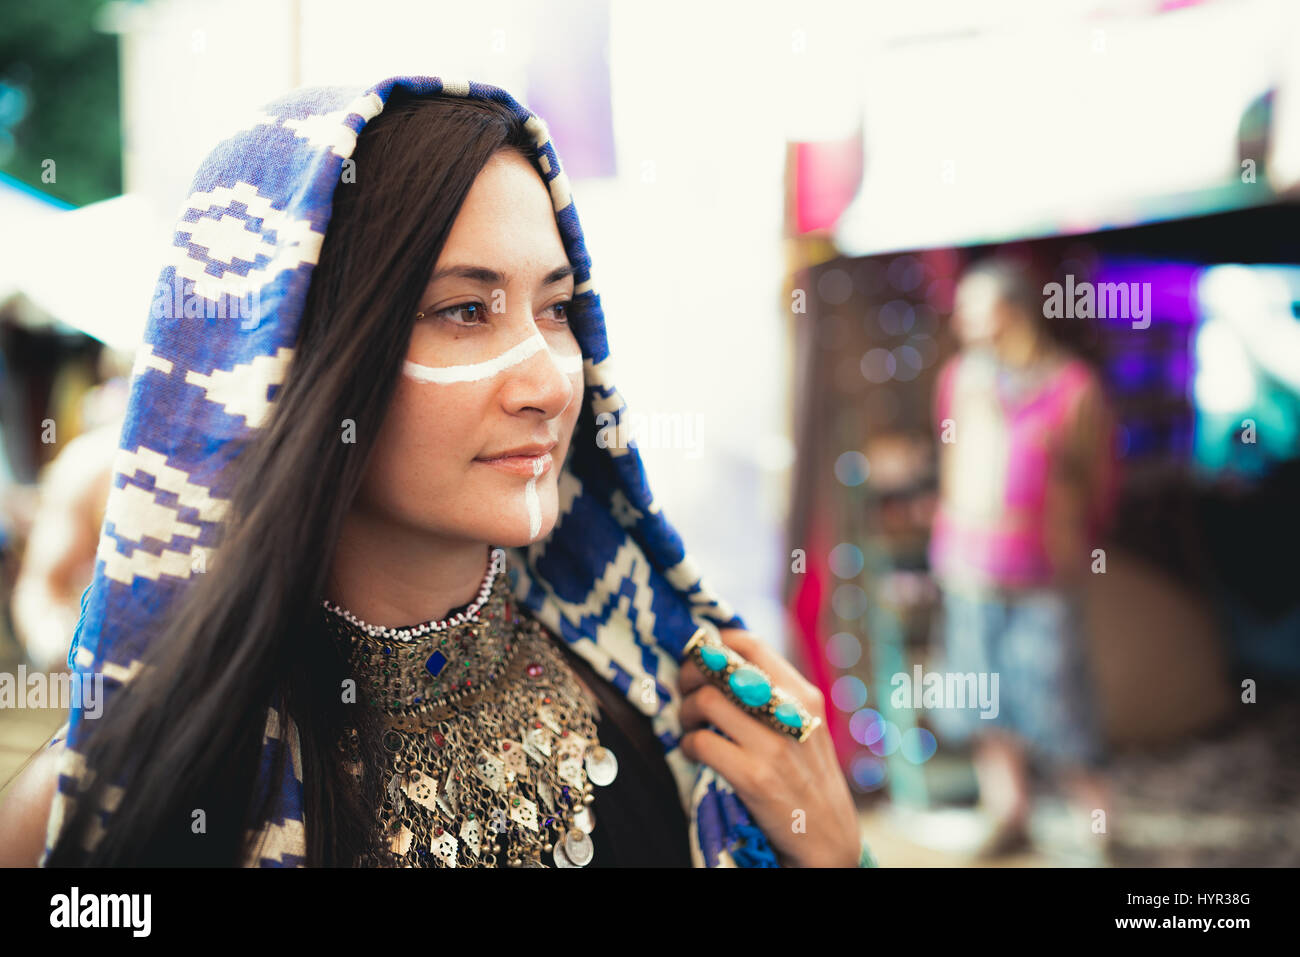 Female music festival attendee in costume and face paint. Stock Photo